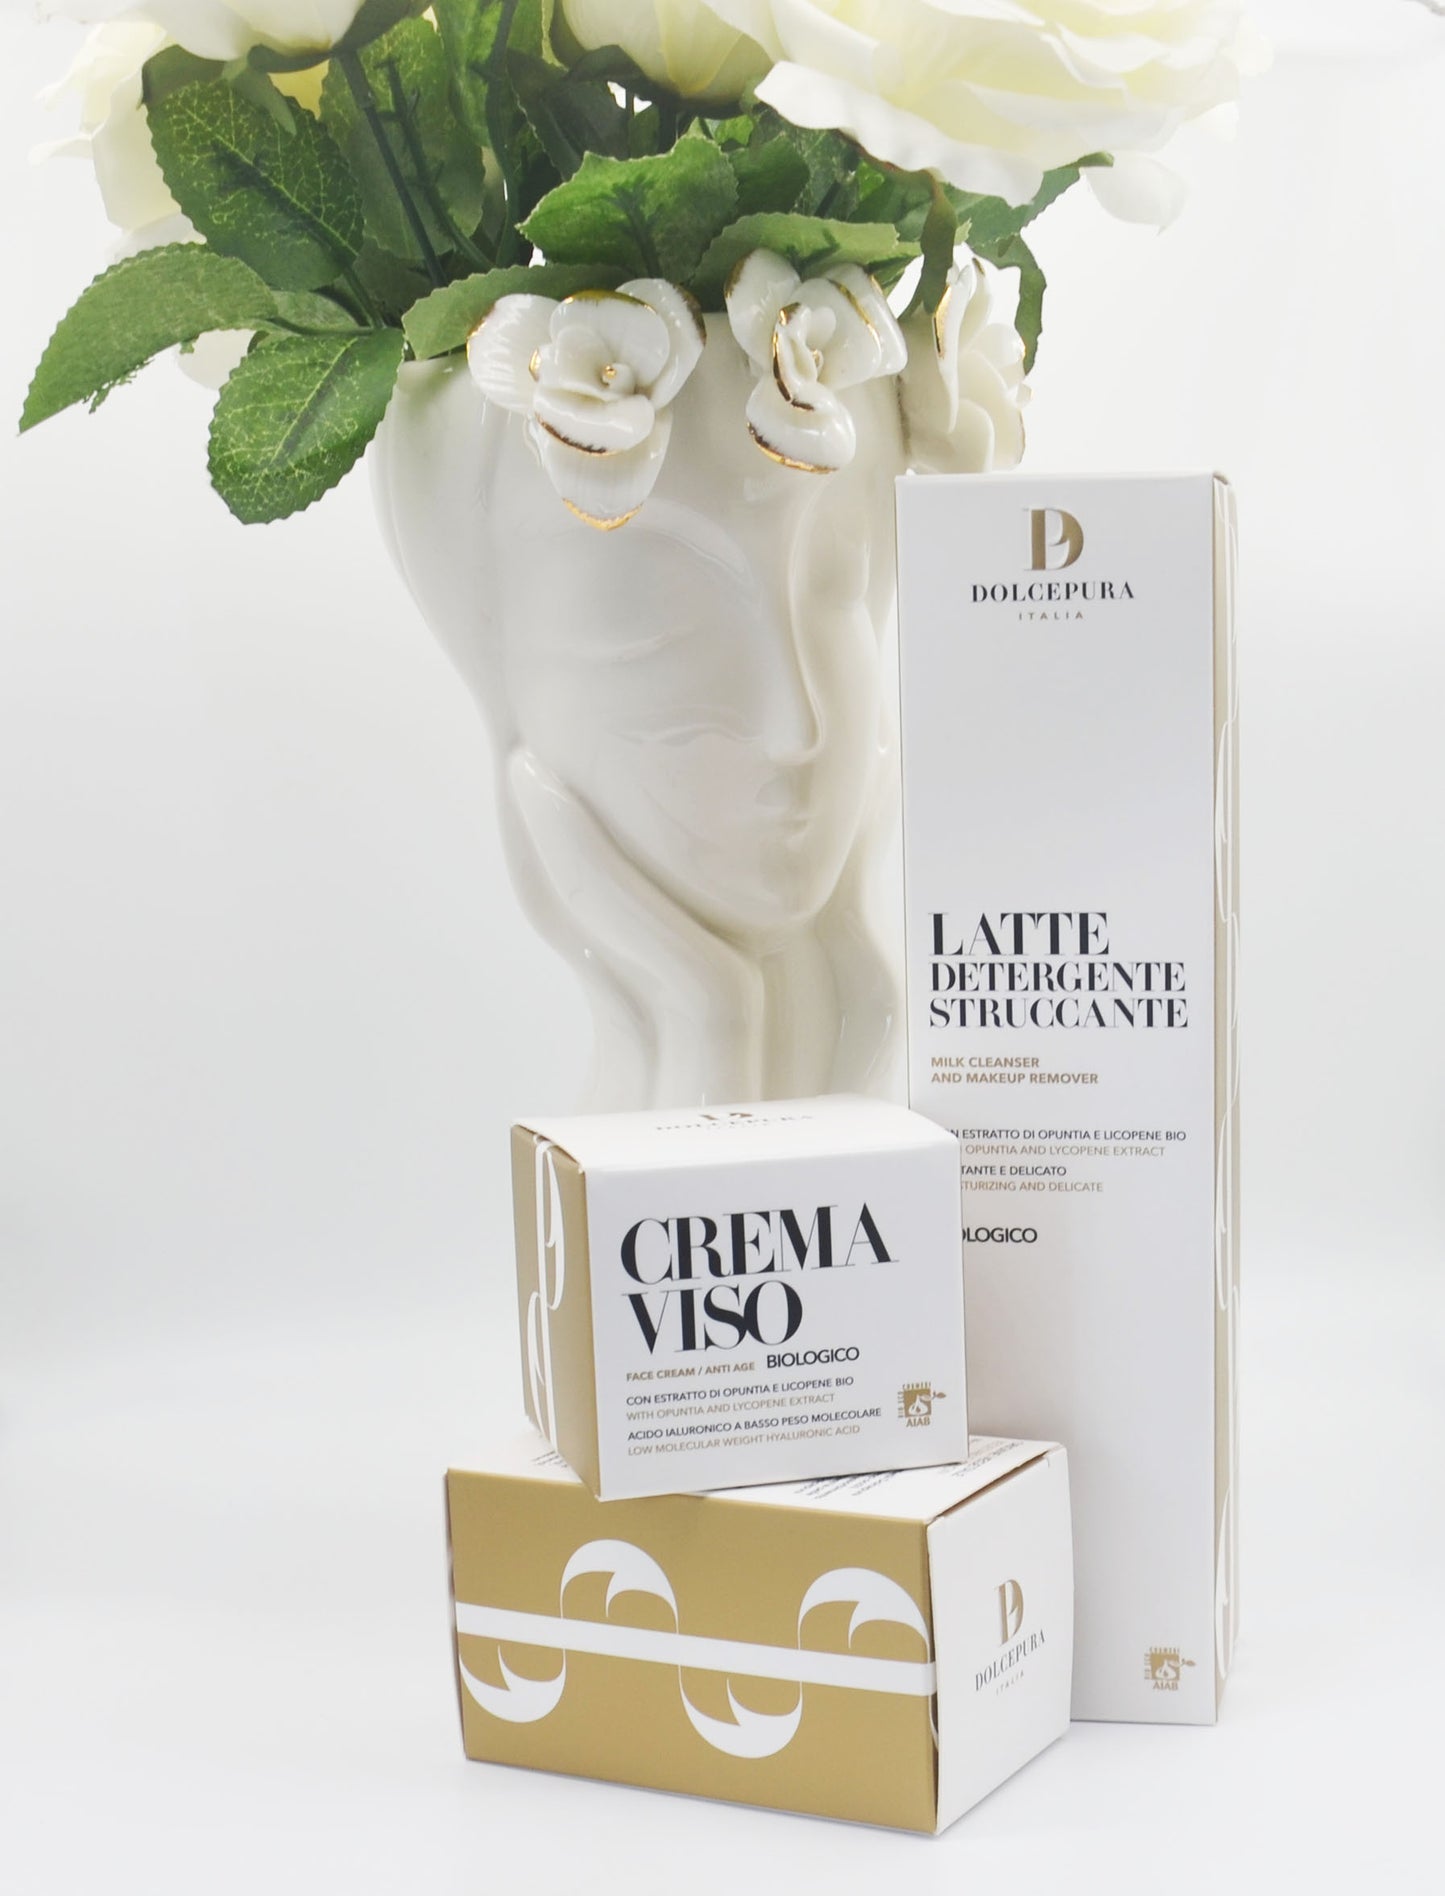 FACE set "BASE" cleansing milk and cream. With Opuntia and Italian certified organic small production lycopene. Made in Italy. Vegetable origin, all skin types